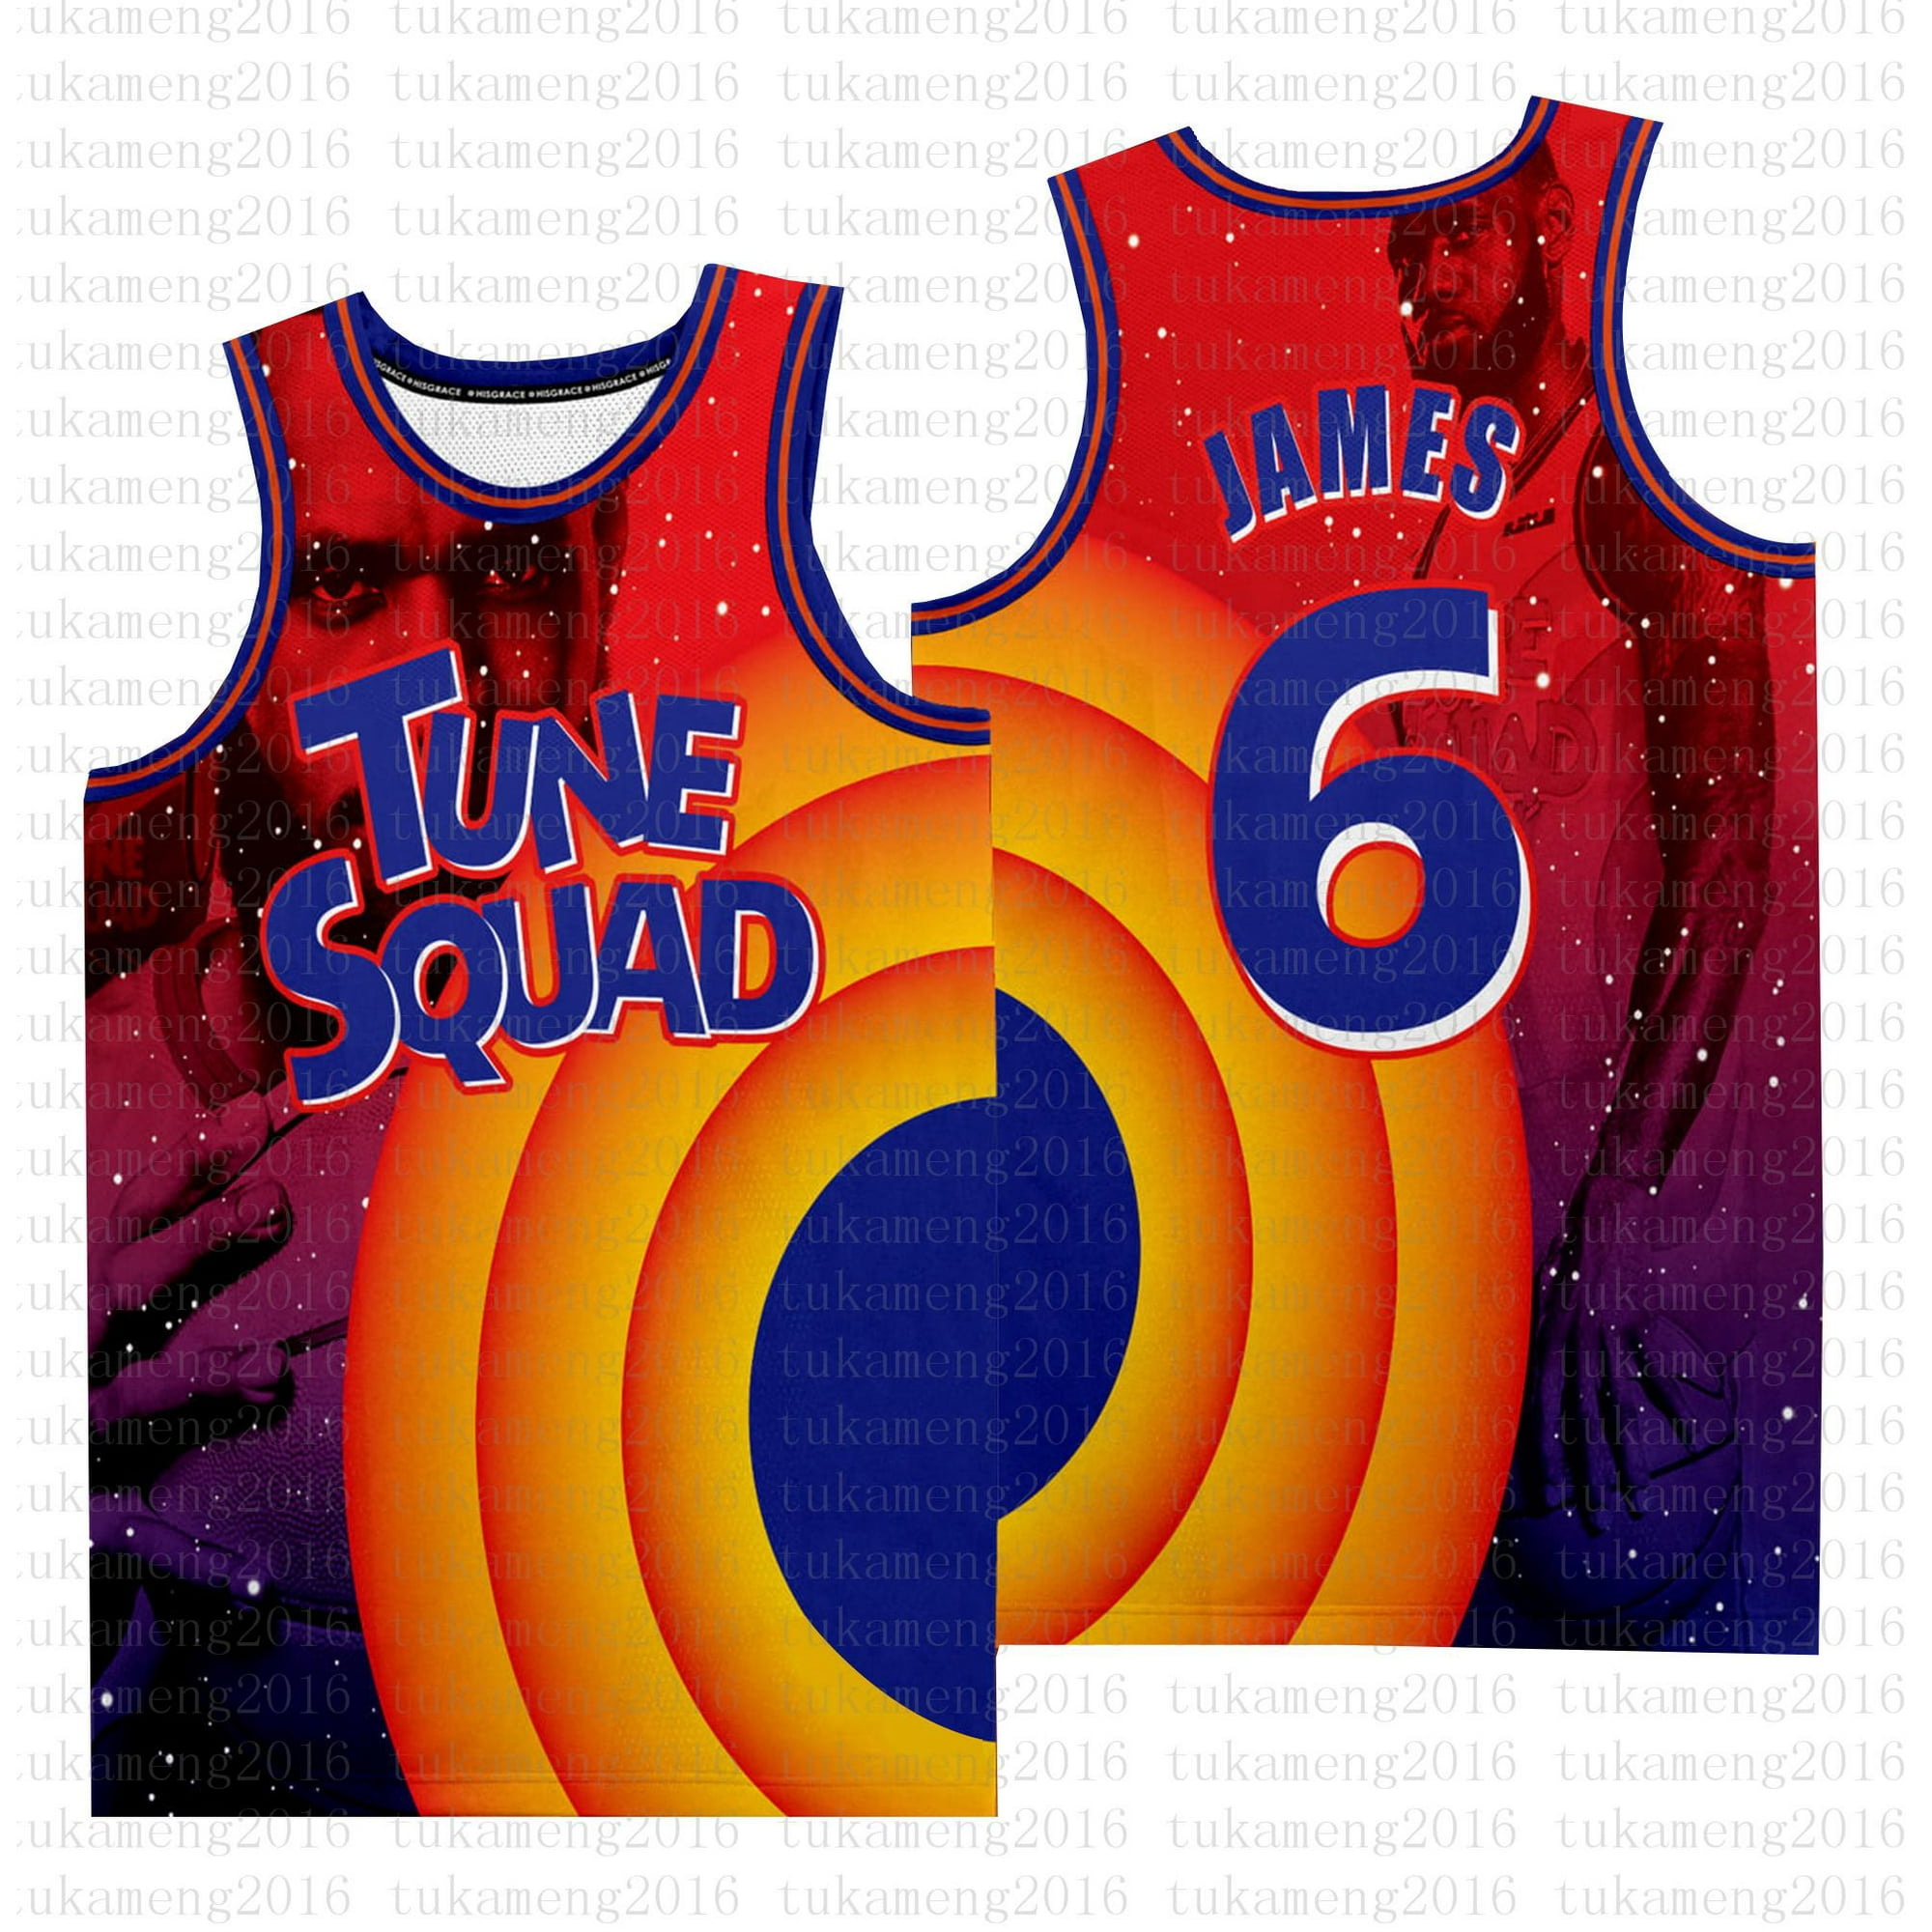 Moive Basketball Space Jam Jersey Tune Squad Looney 1 Bugs Bunny 23 Lebron  James LEGACY SUPERSTAR MONSTARS CHECKERED LOLA TUNESQUAD STRIPED High  School Team From Top_sport_mall, $14.04